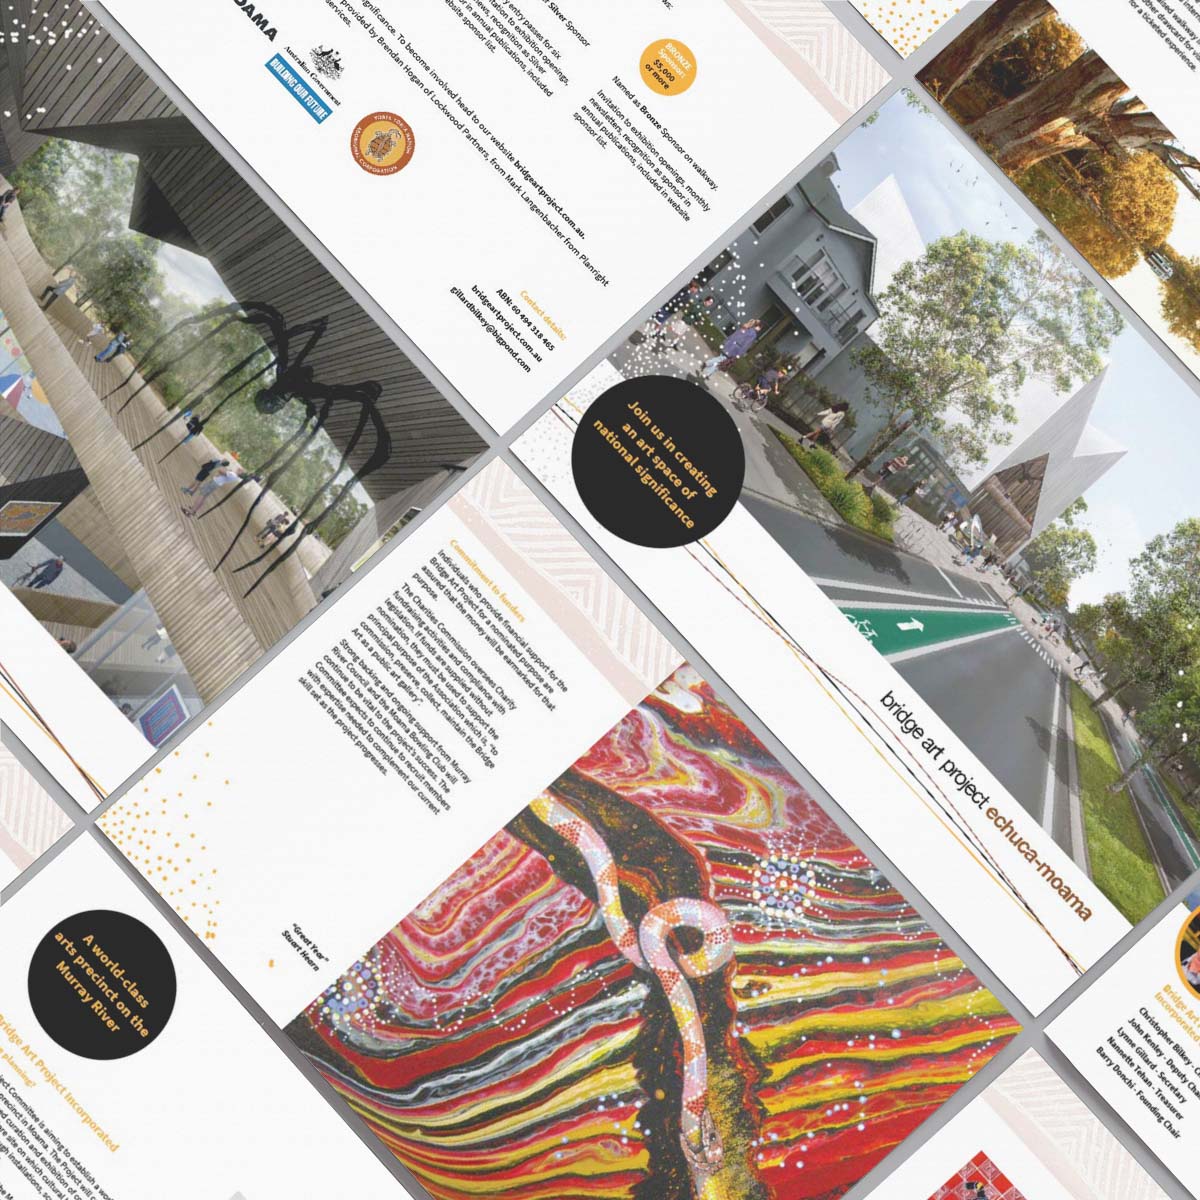 Landscape view of booklet with perspective view of street image with trees and buildings along with some aboriginal red and yellow colour artwork and snake.